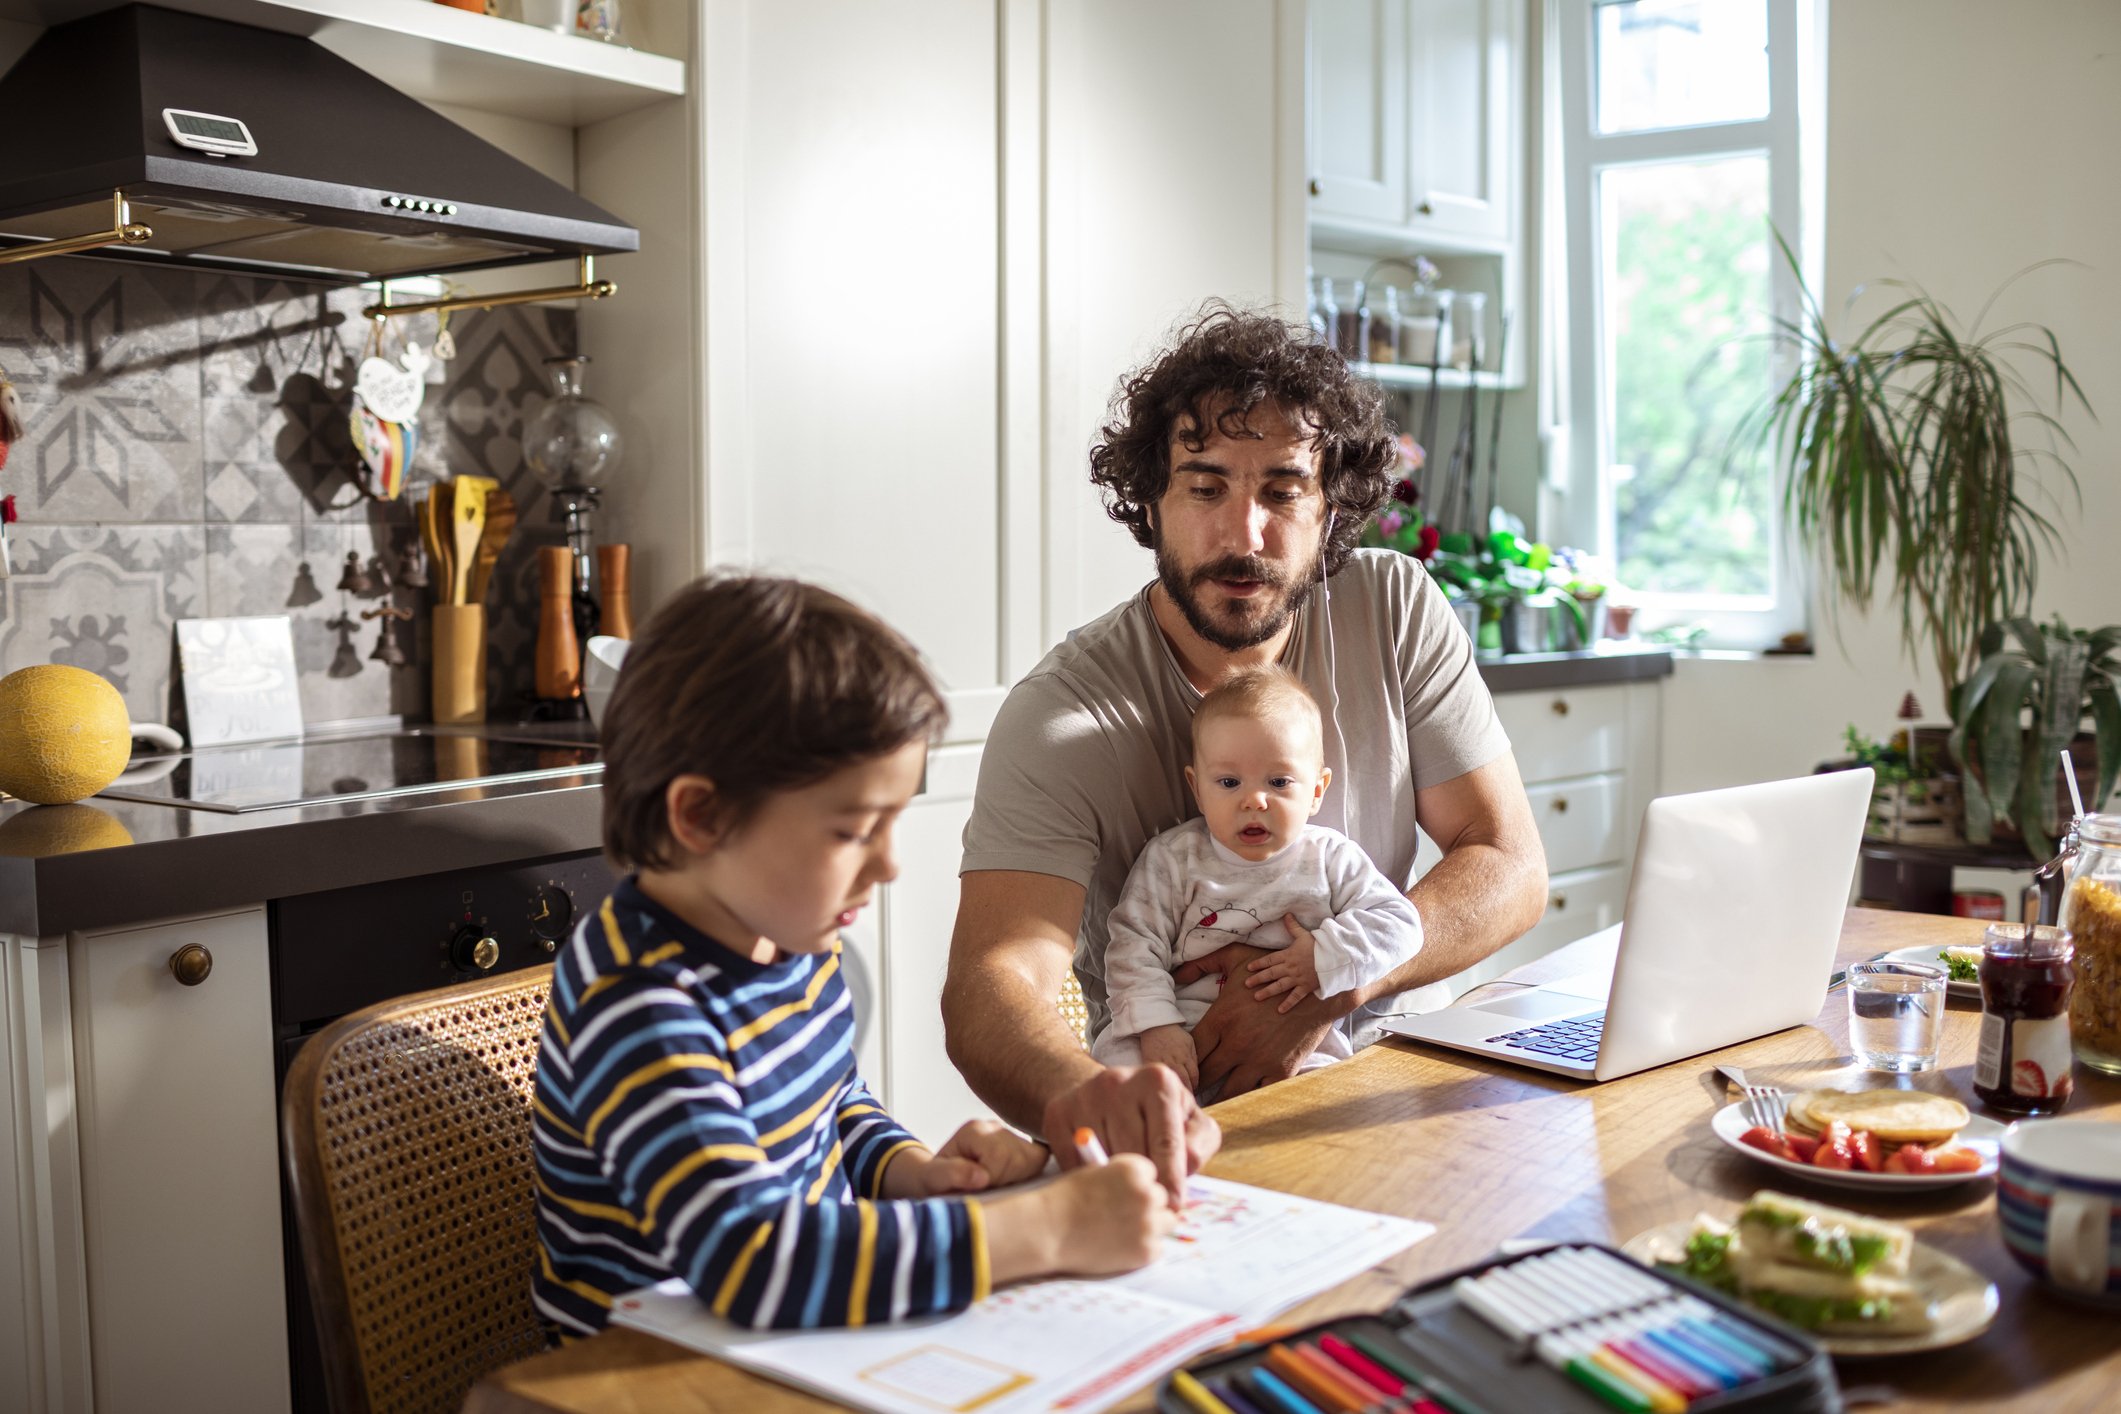 A father working from home with his son studying next to him while holding his baby | Source: Getty Images